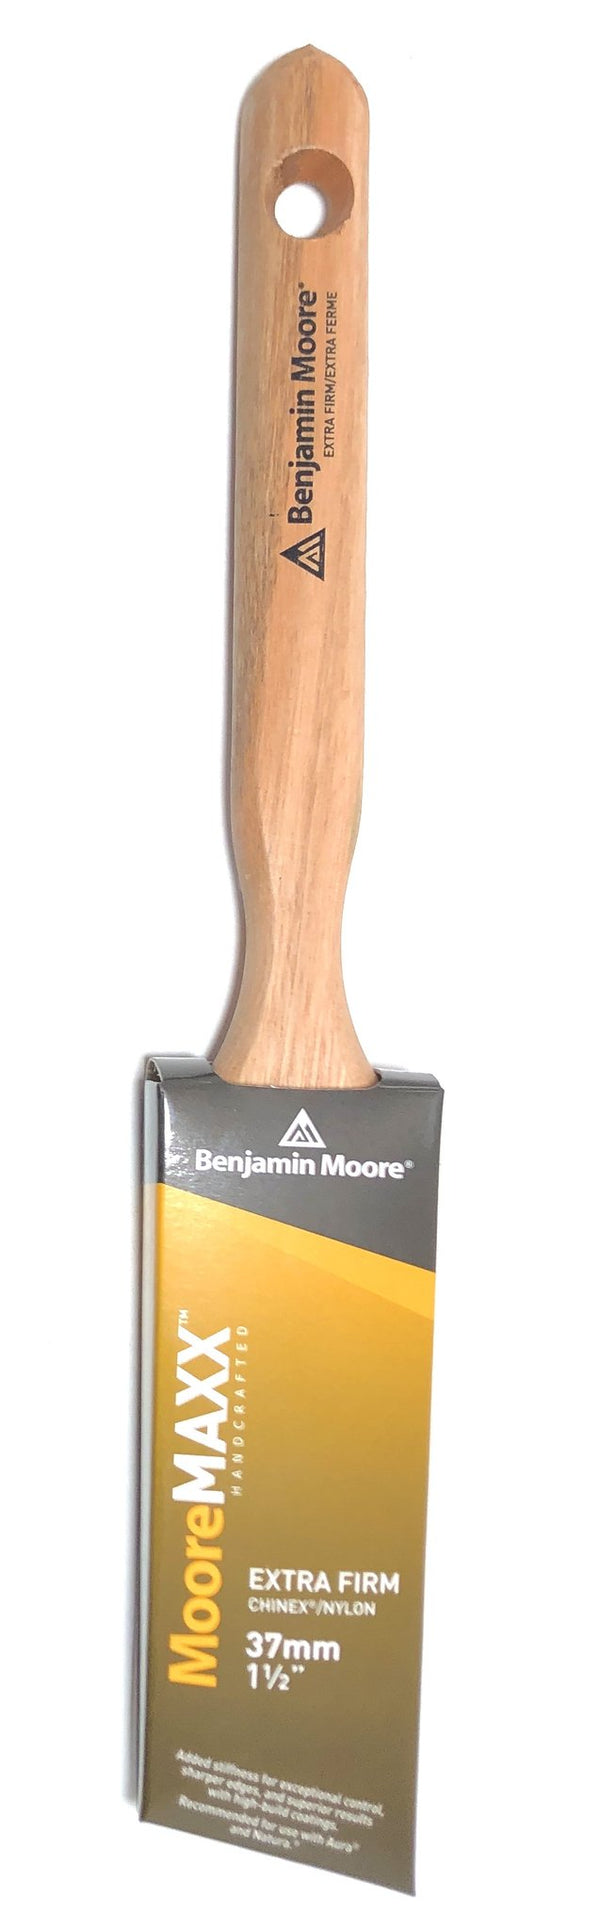 MooreMAXX 1 ½" Extra Firm Angle Sash Brush     MooreMAXX™ is a full line of premium applicators. All the brushes are handcrafted from top quality extra firm polyester/nylon filaments. They offer exceptional control and provide superior results in high-build coatings. Recommended for use with Aura ® , Regal ® Select, and Benjamin Moore Natura™.